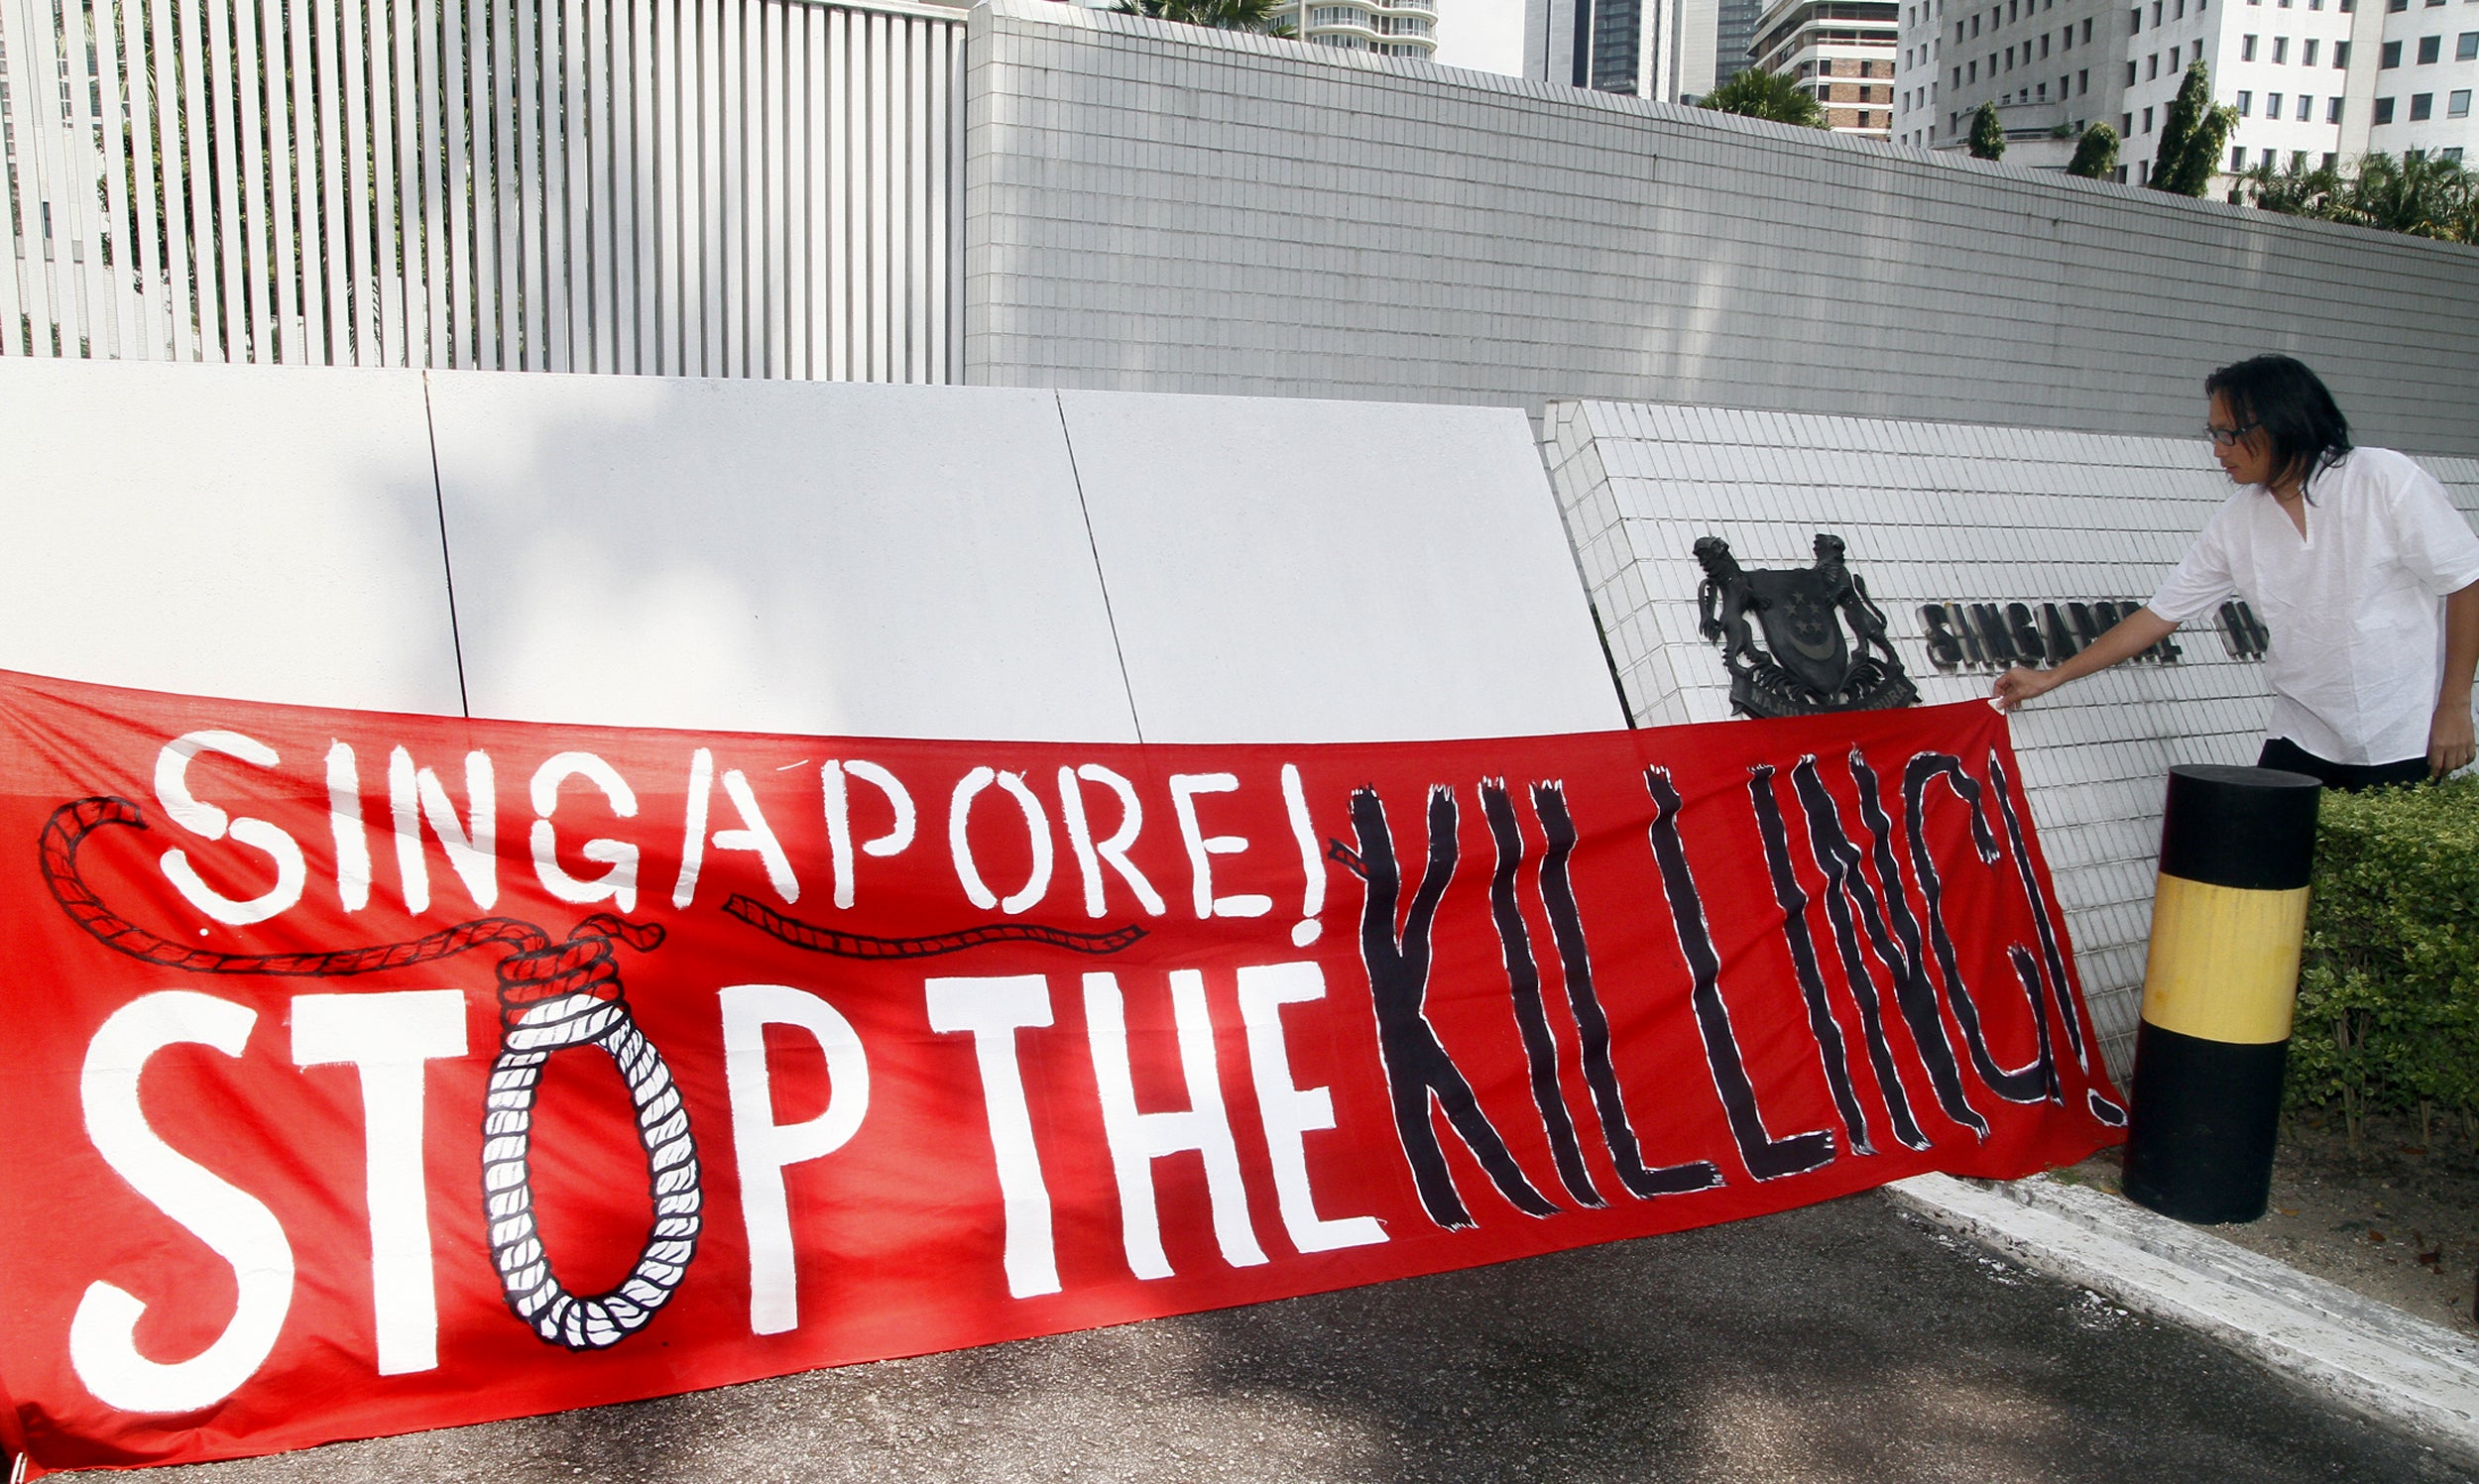 Singapore has signalled a clear intention to resume executions of death row inmates after a hiatus of more than two years